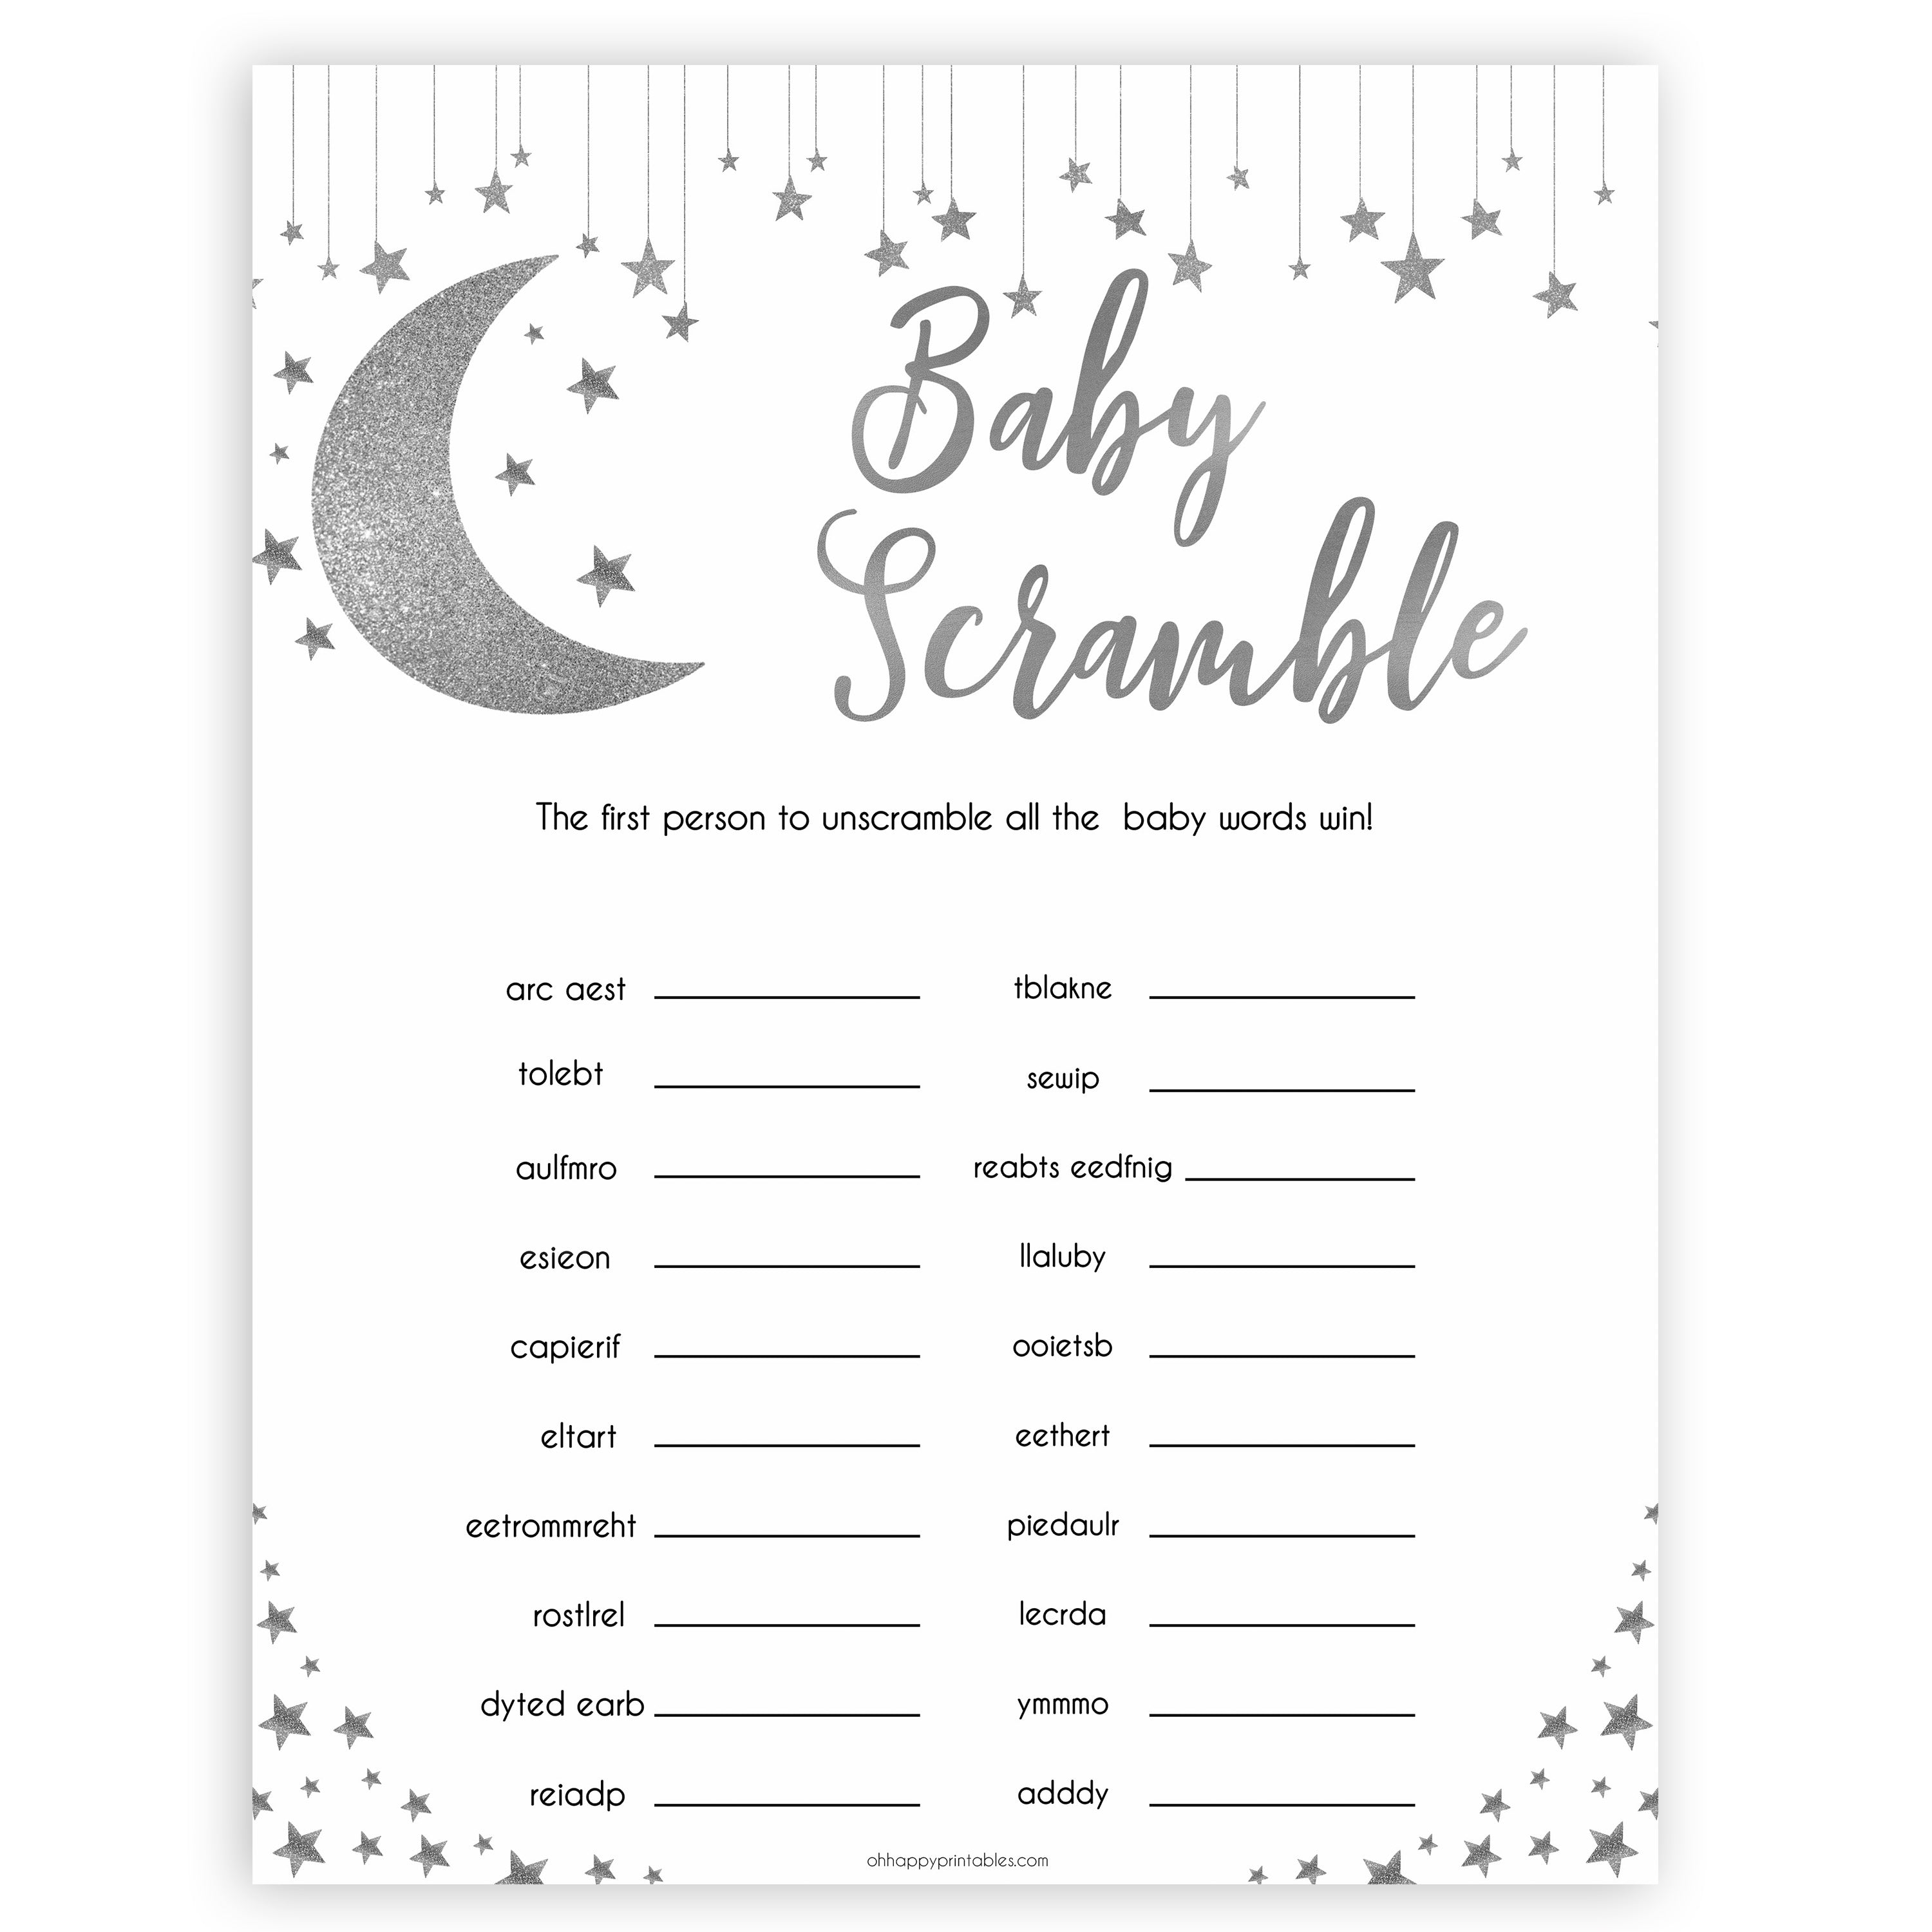 Silver little star, baby scramble baby games, baby shower games, printable baby games, fun baby games, twinkle little star games, baby games, fun baby shower ideas, baby shower ideas